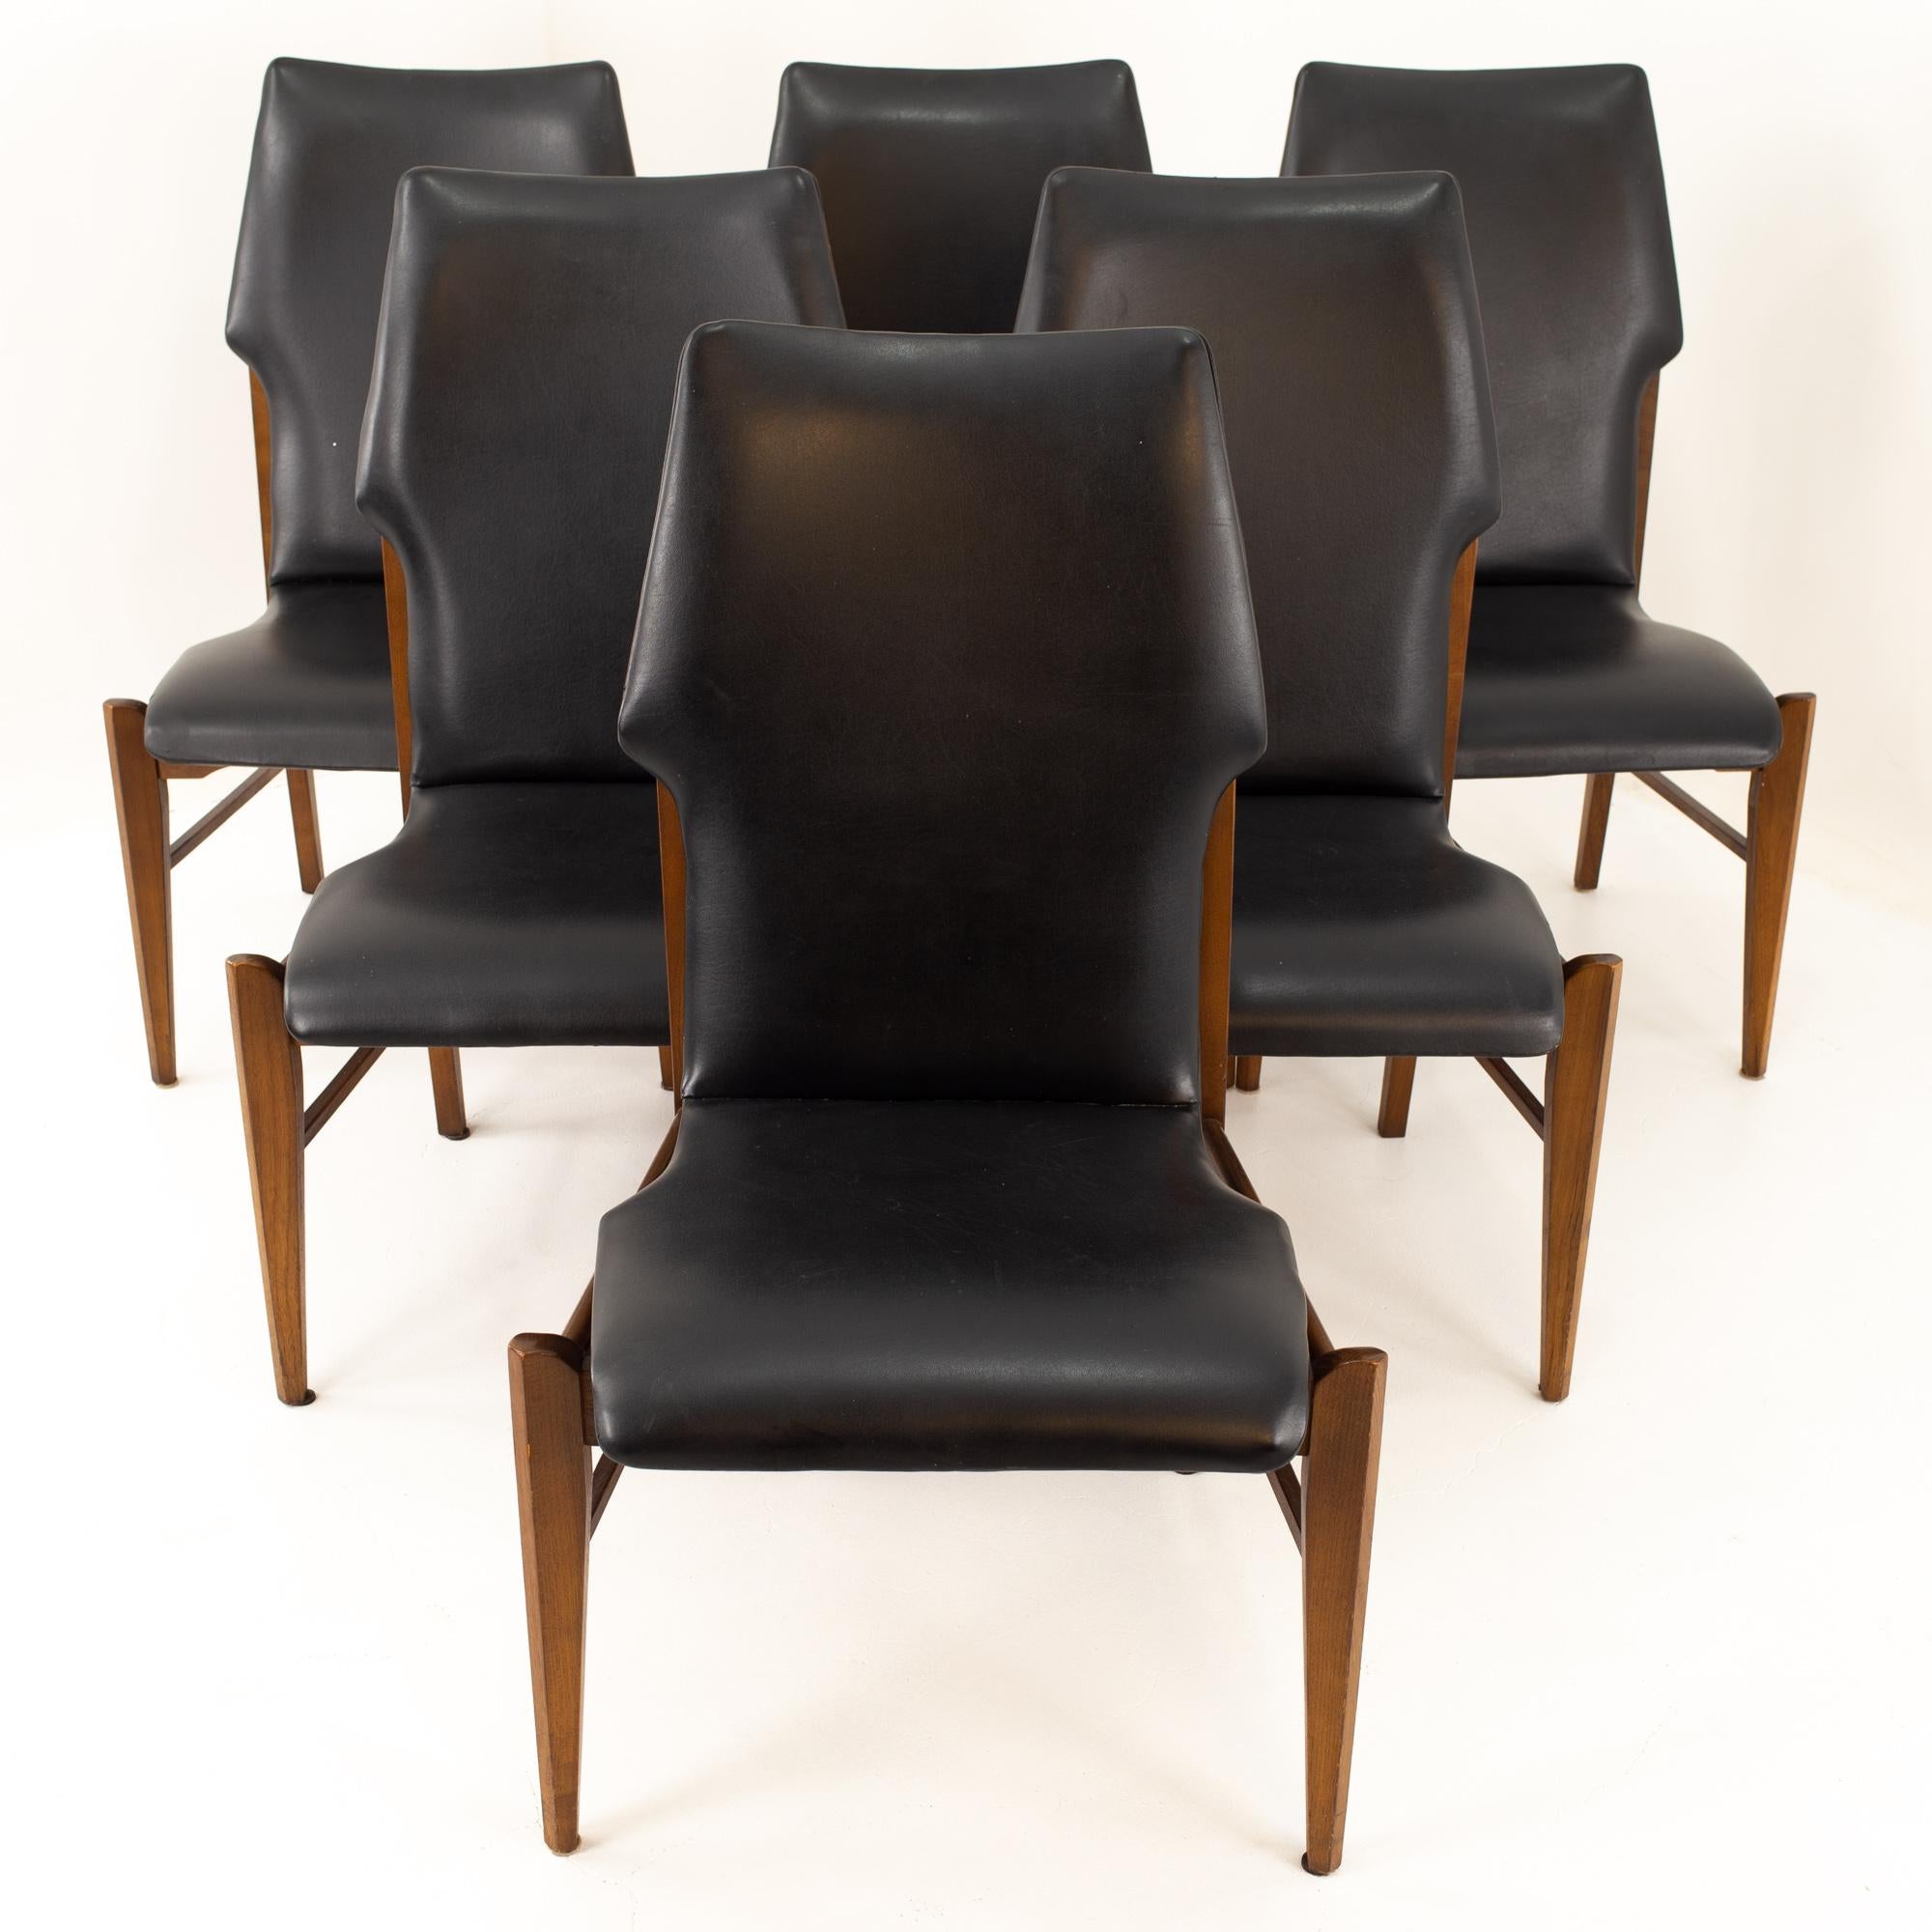 Lane first edition mid century dining chairs - set of 6

Each chair measures: 19 wide x 20 deep x 39 high with a seat height of 17 and arm height of 25 inches; the chair clearance is 20.5 inches

?All pieces of furniture can be had in what we